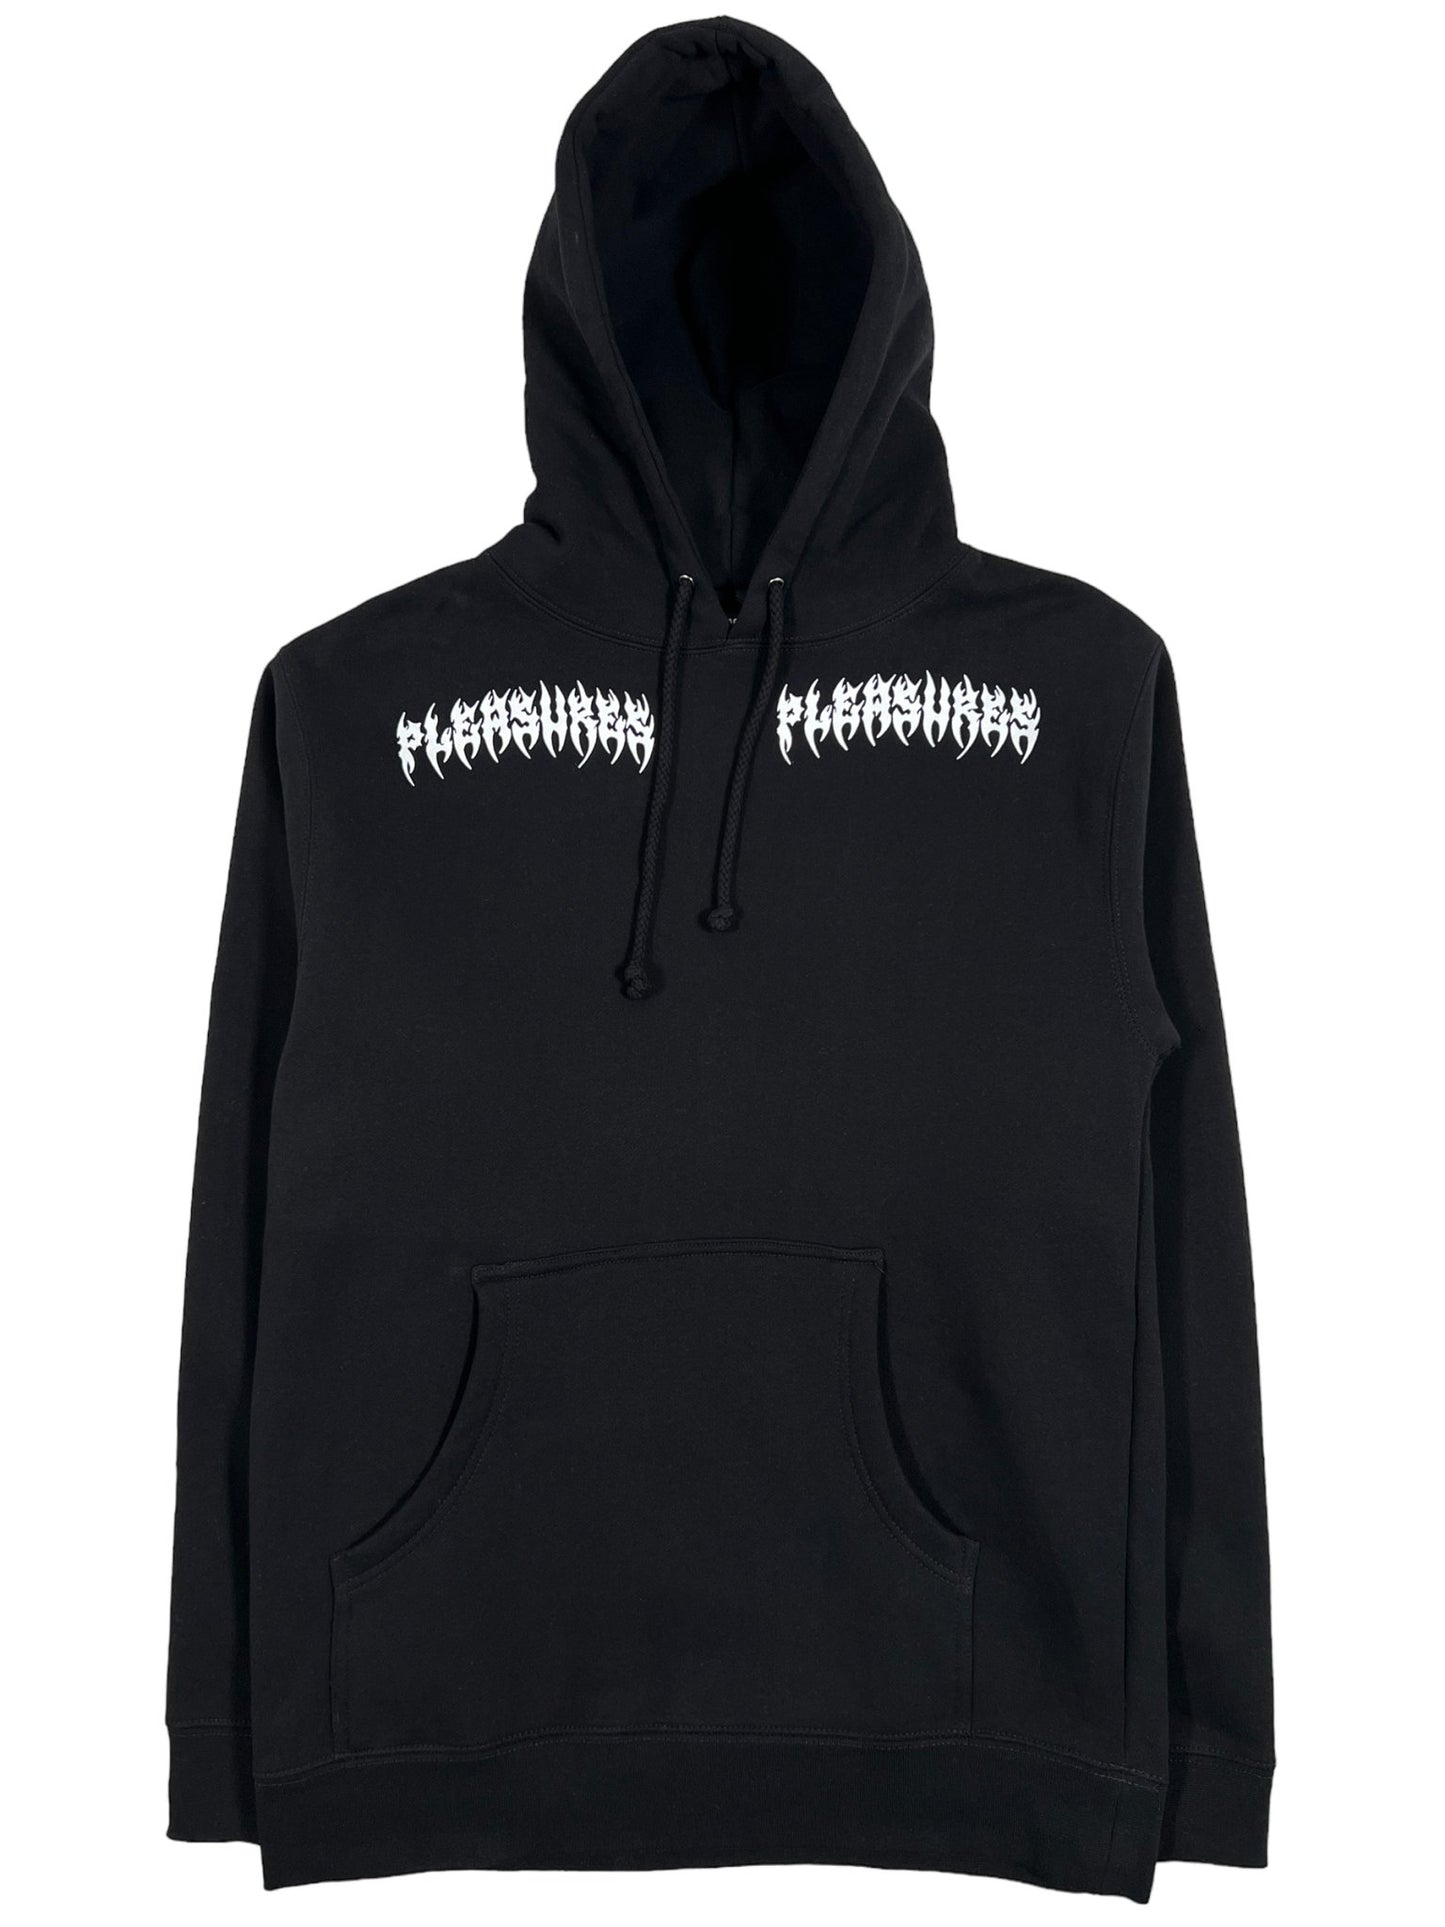 A black PLEASURES RIPPED HOODIE BLACK with a white logo on it, designed for comfort.